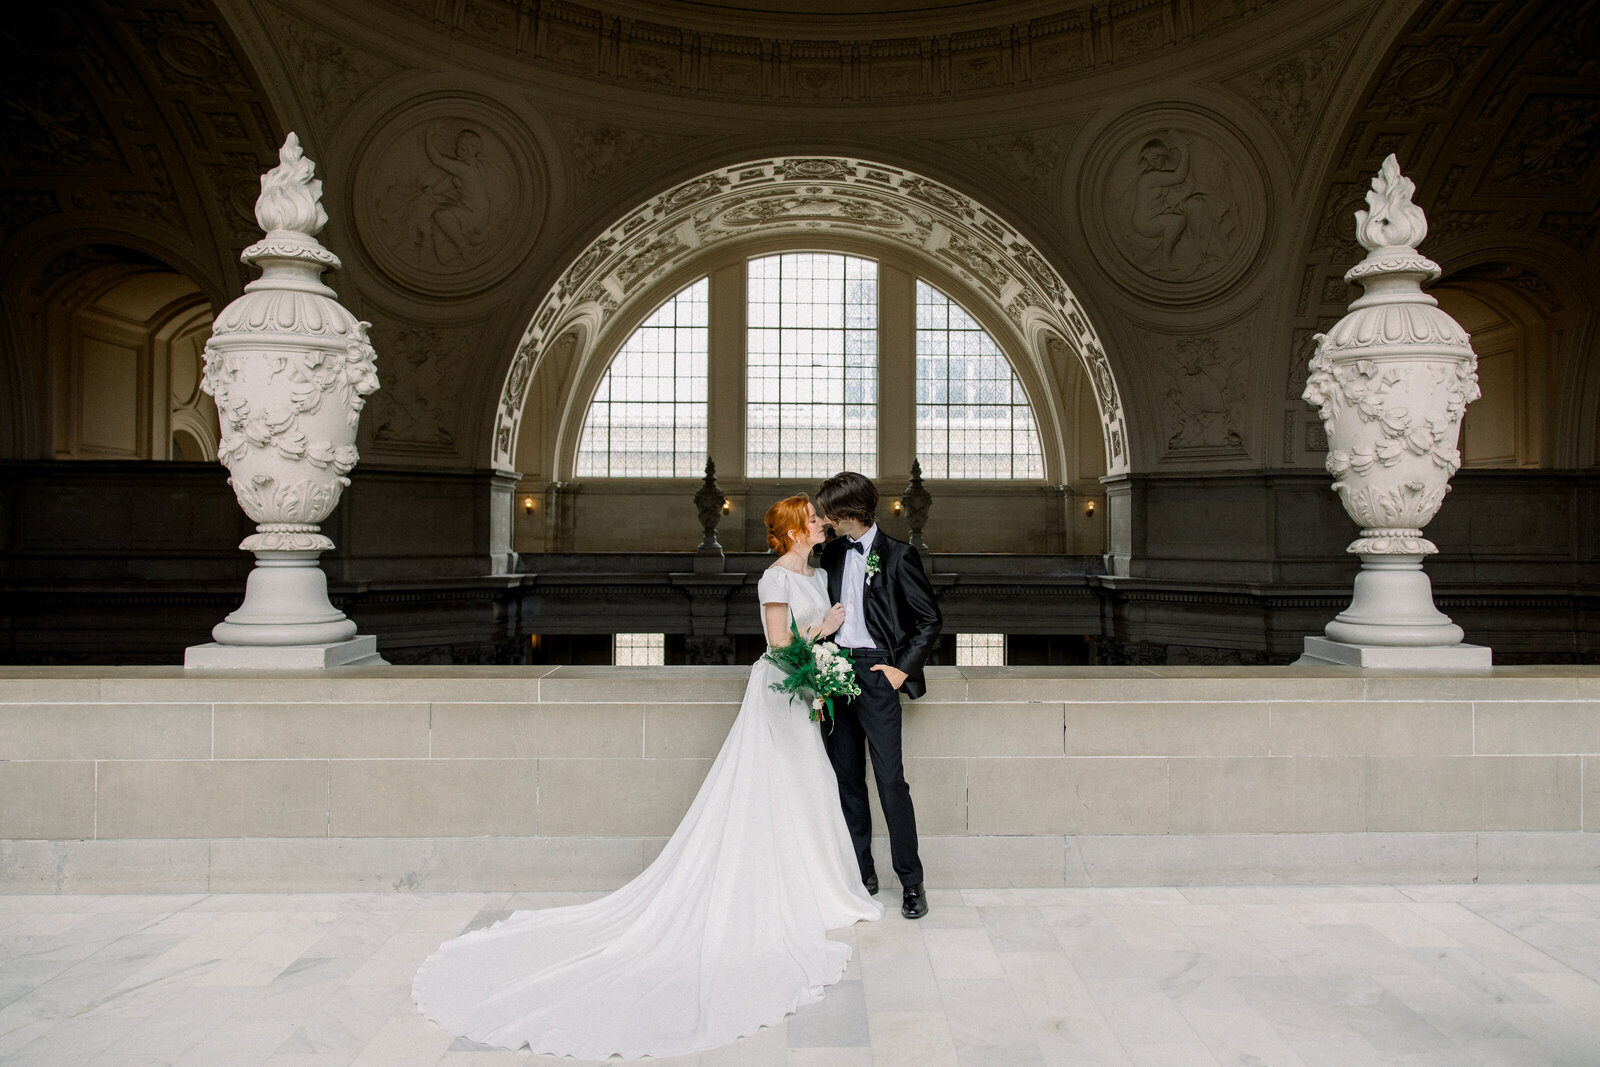 Tiffany Longeway's photography highlights the grandeur of San Francisco City Hall, providing an elegant and historic setting for this timeless wedding portrait.